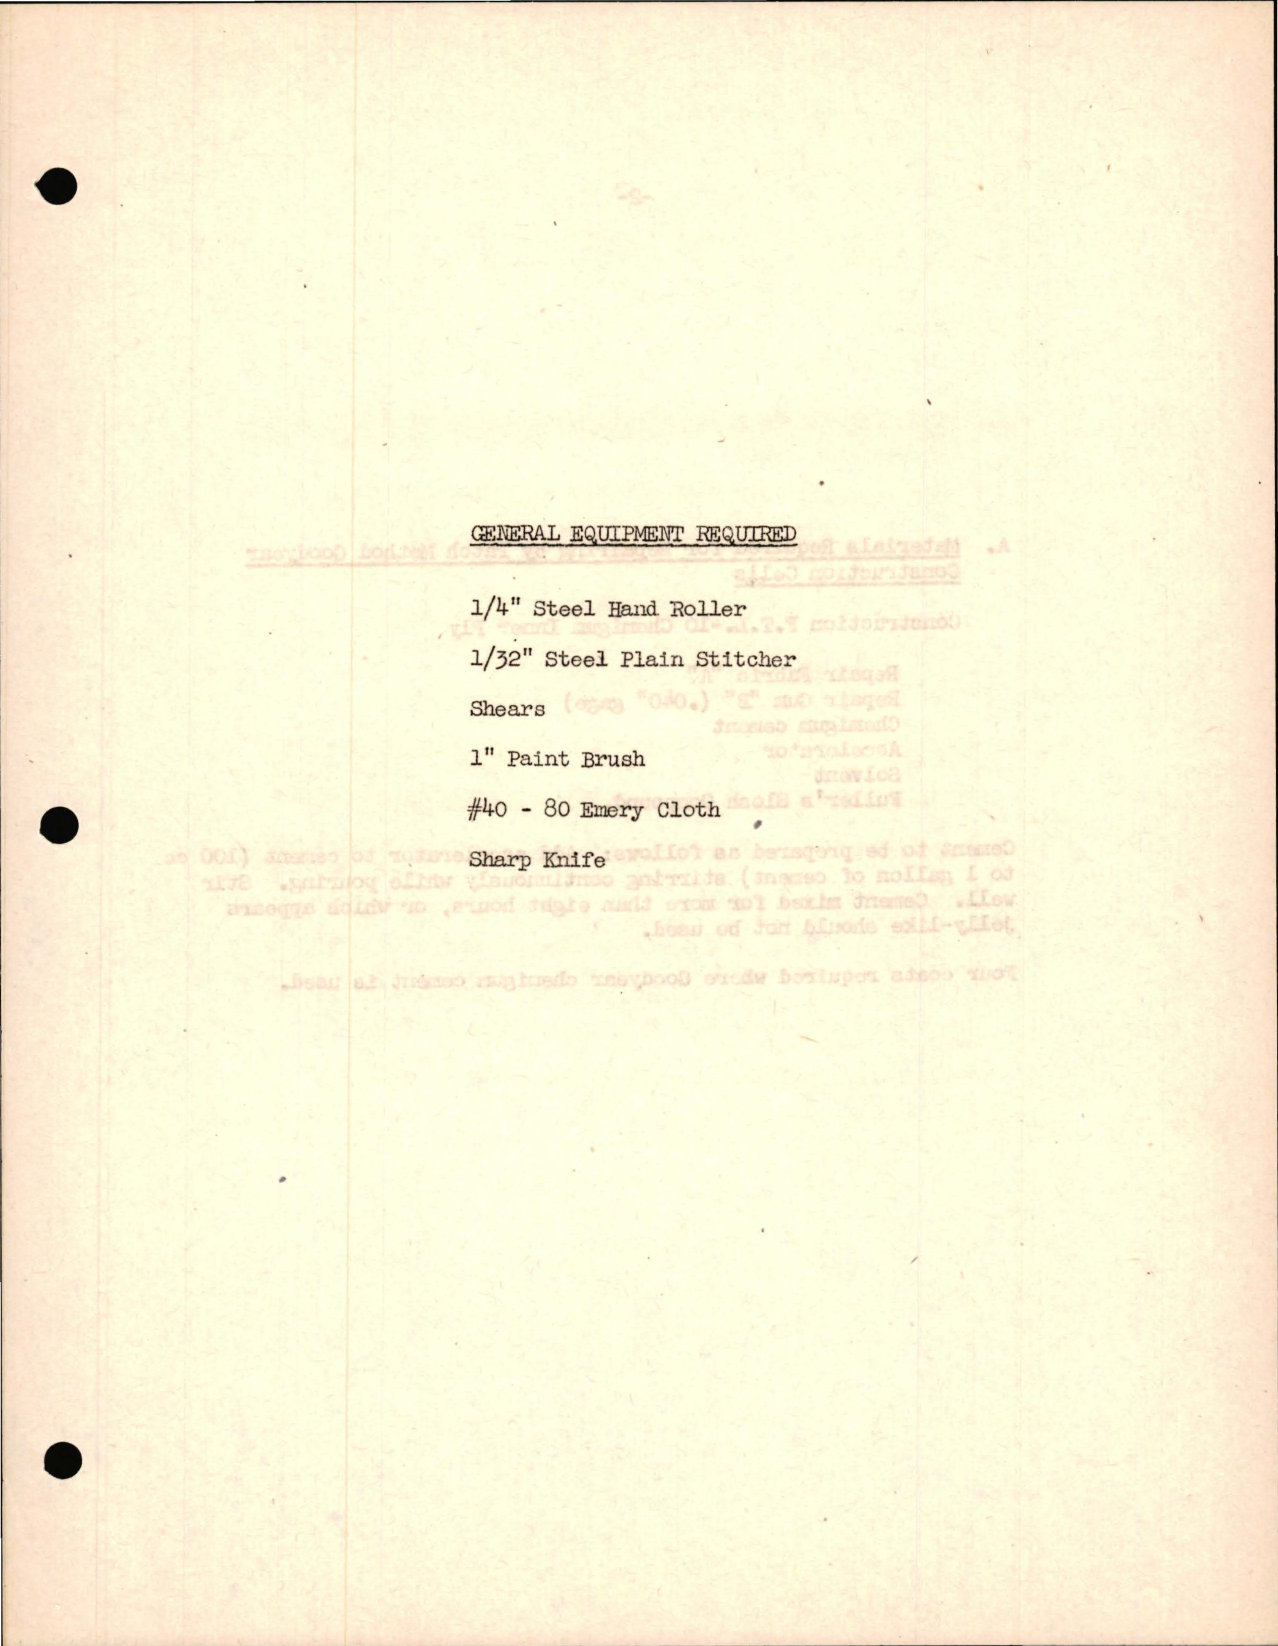 Sample page 5 from AirCorps Library document: General Repair Procedure for Self Sealing Fuel and Oil Cells